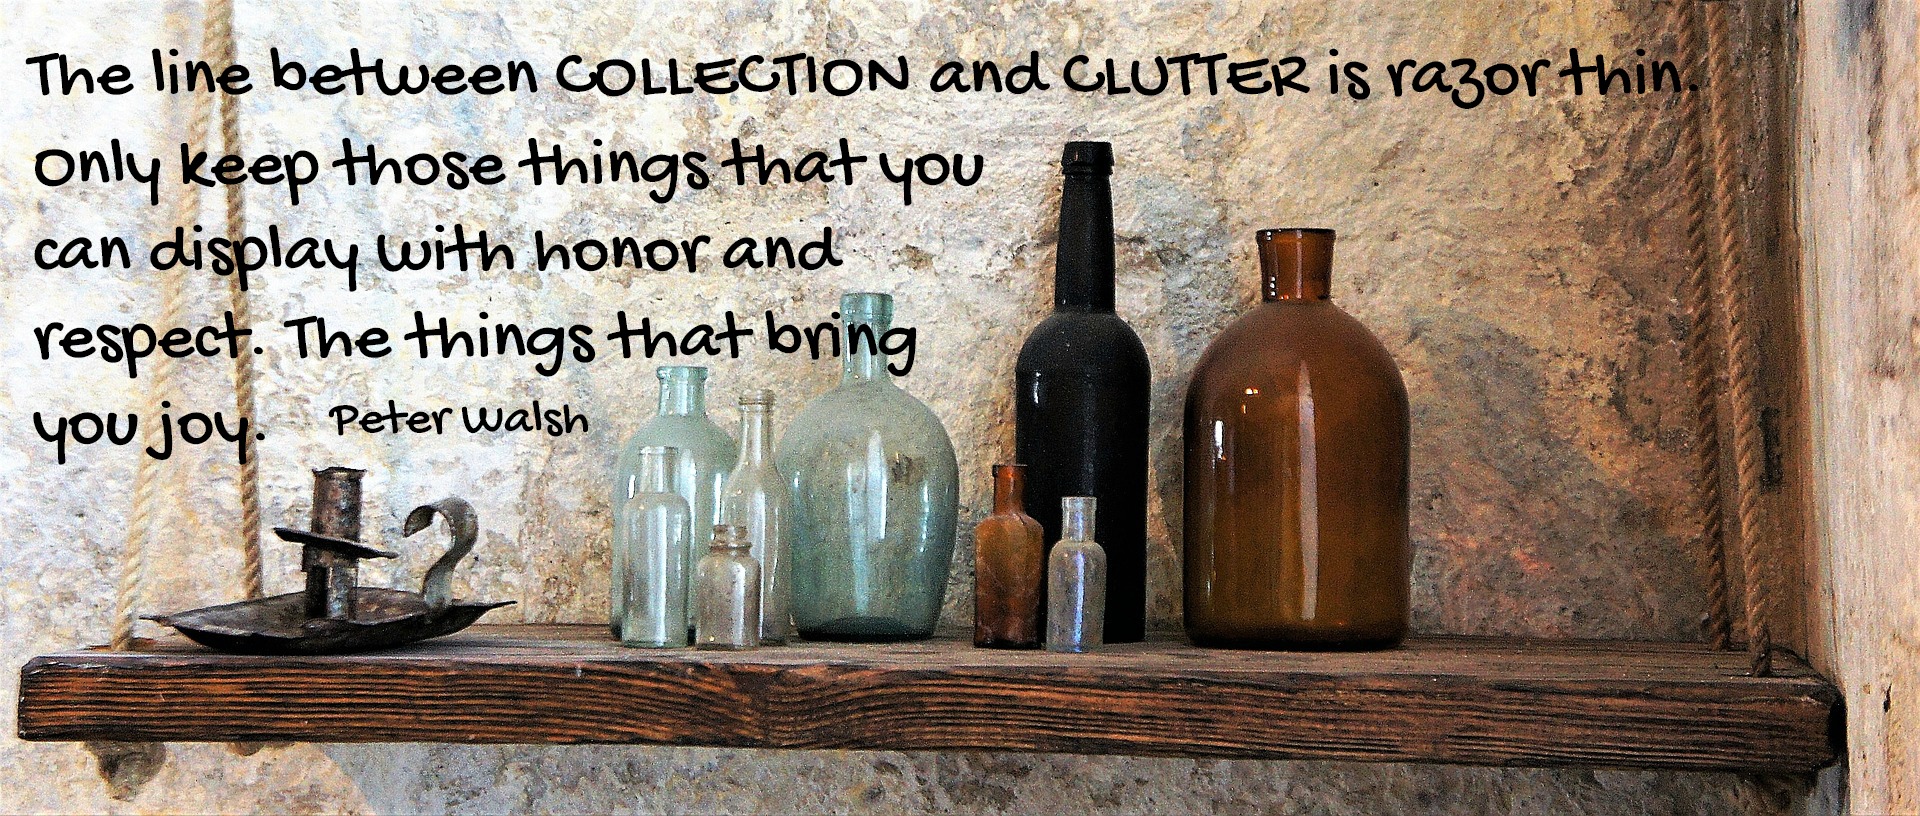 Clutter Doesn’t Always Look Cluttered